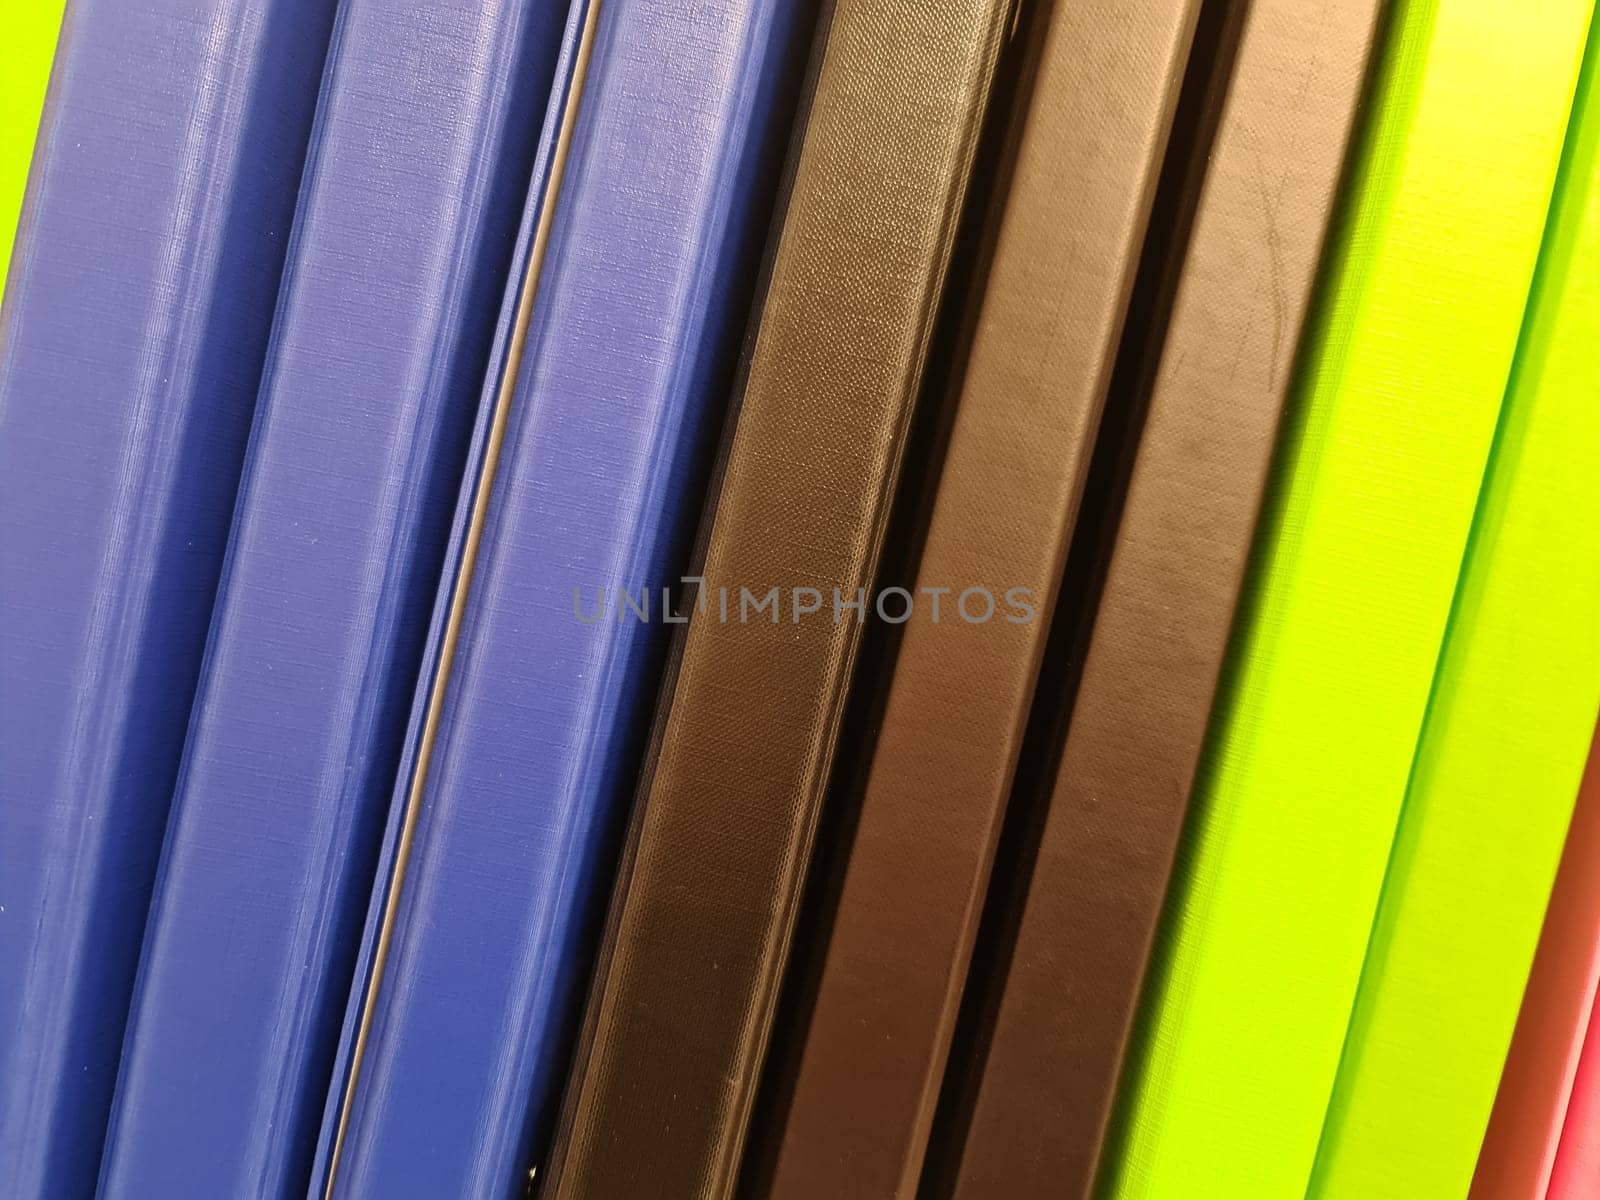 View of coloful plastic surfaces